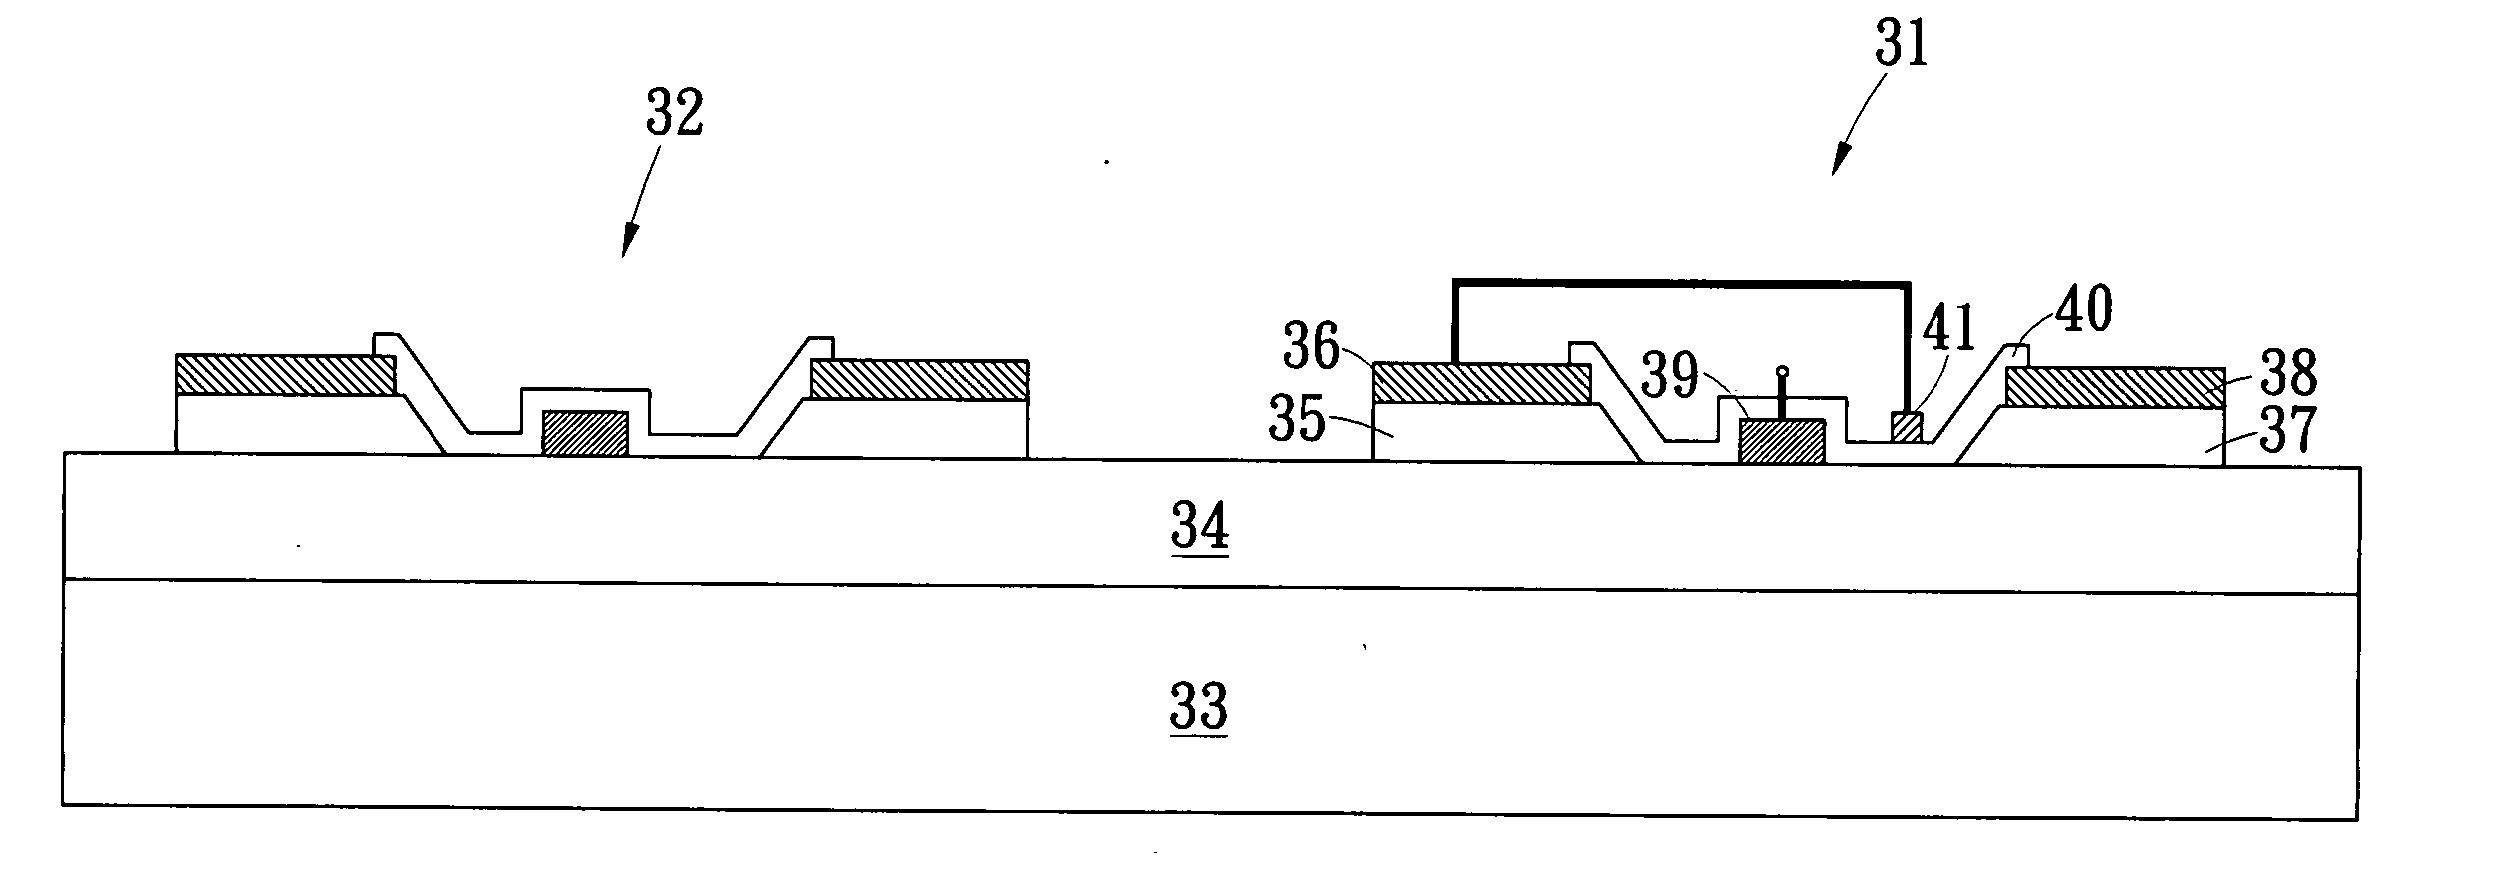 Semiconductor devices integrating high-voltage and low-voltage field effect transistors on the same wafer